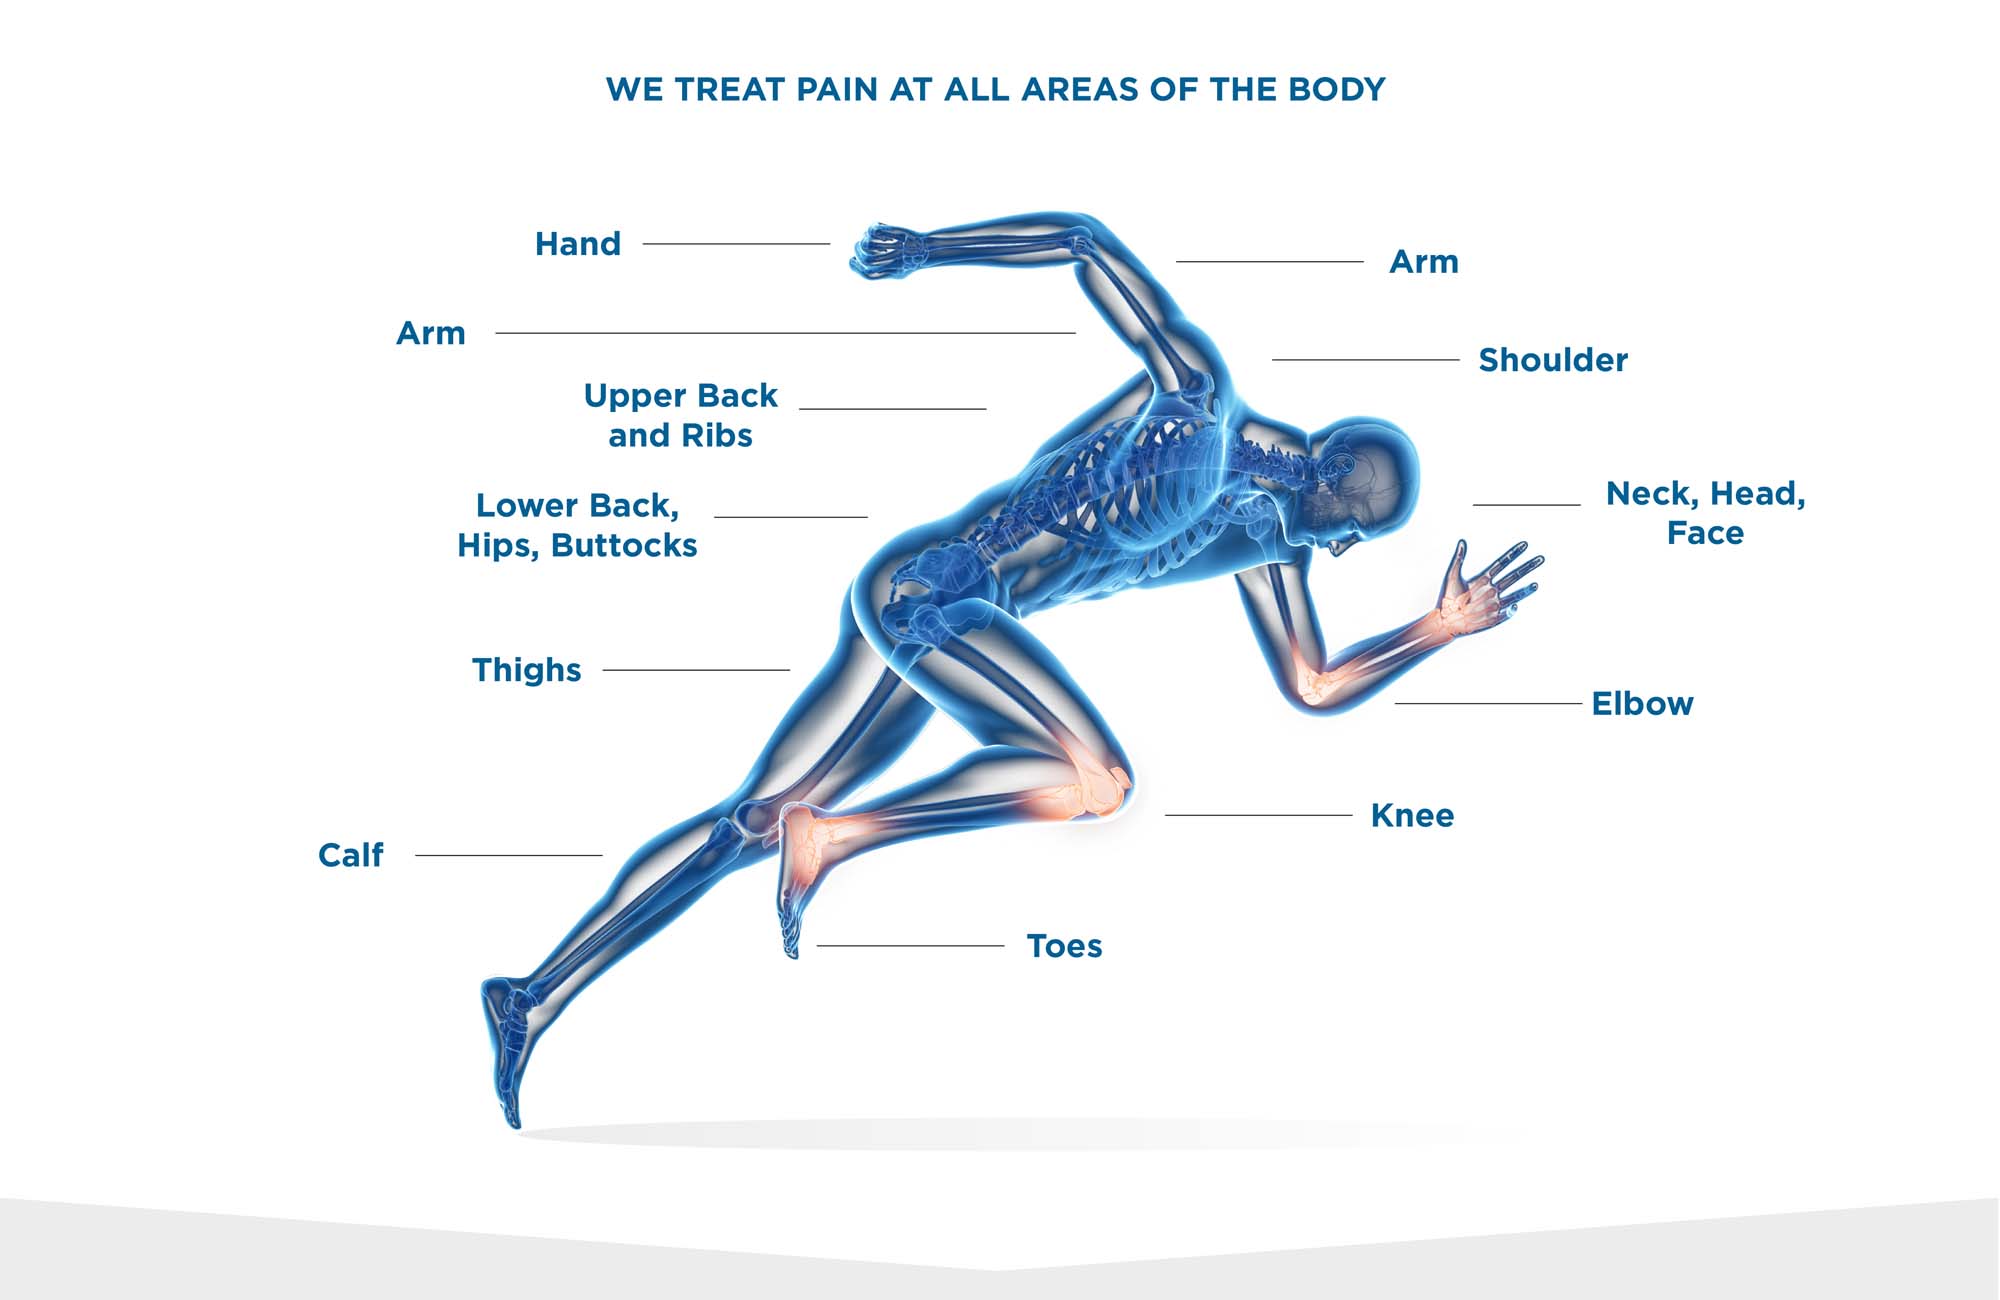 We treat pain at all areas of the body